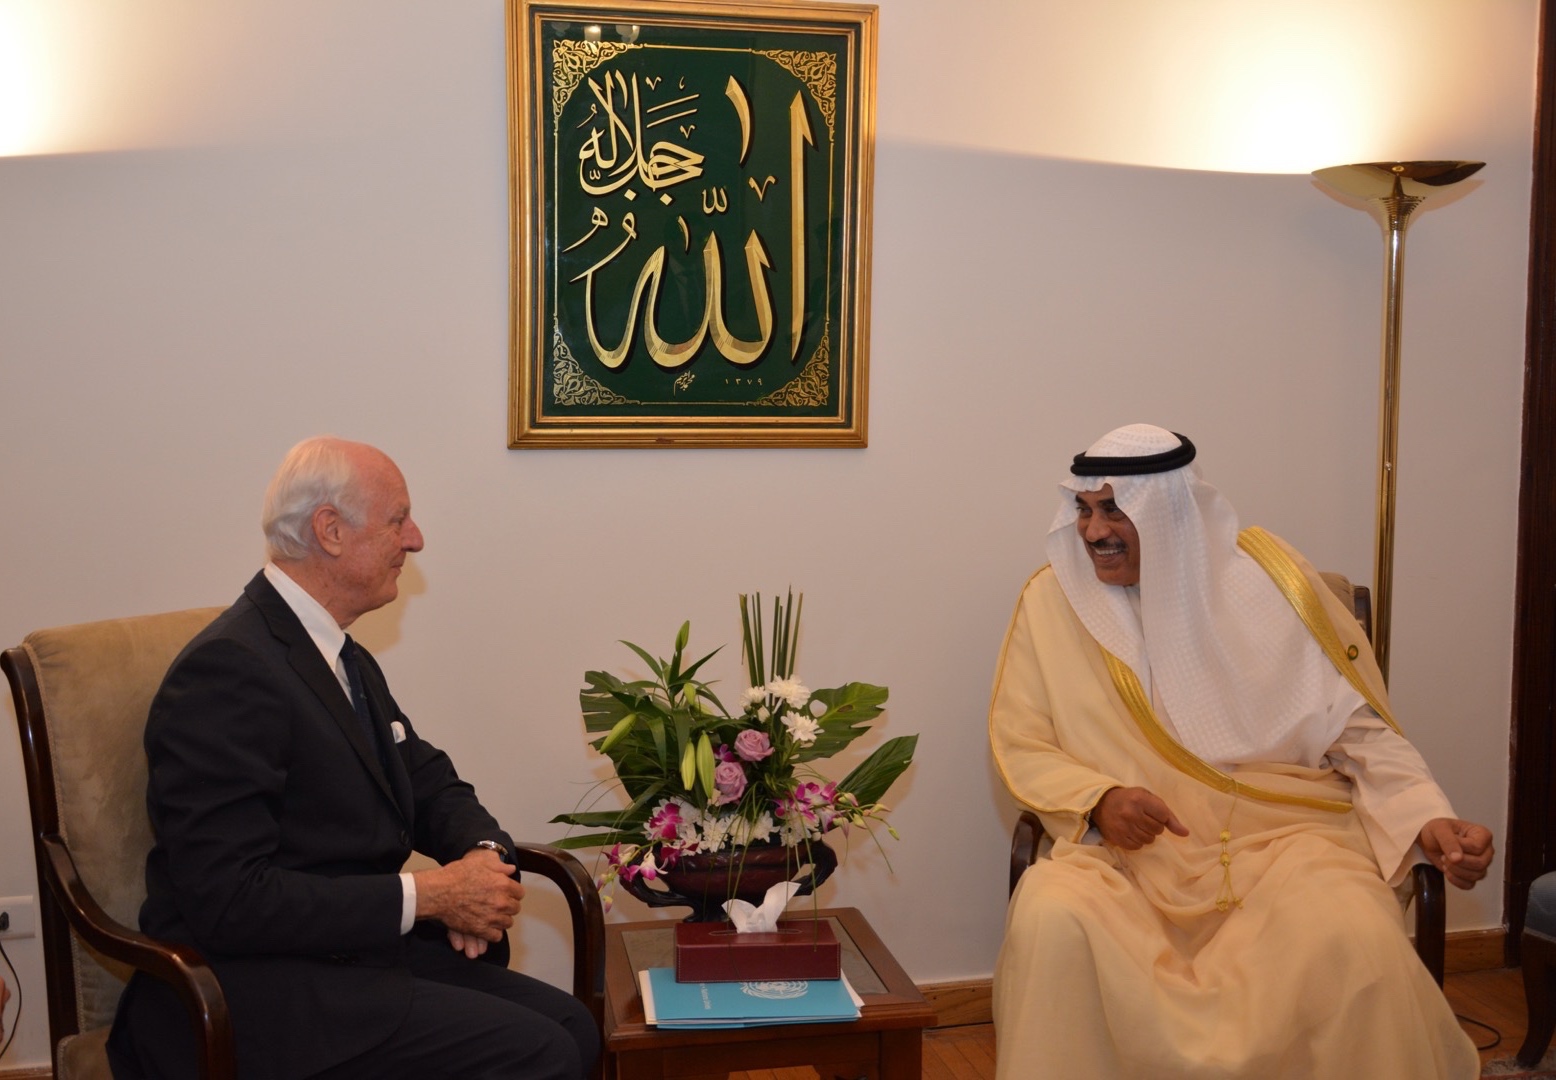 Kuwait's First Deputy Prime Minister and Minister of Foreign Affairs Sheikh Sabah Al-Khaled Al-Hamad Al-Sabah meets the UN Special Envoy of the Secretary-General for Syria Staffan de Mistura